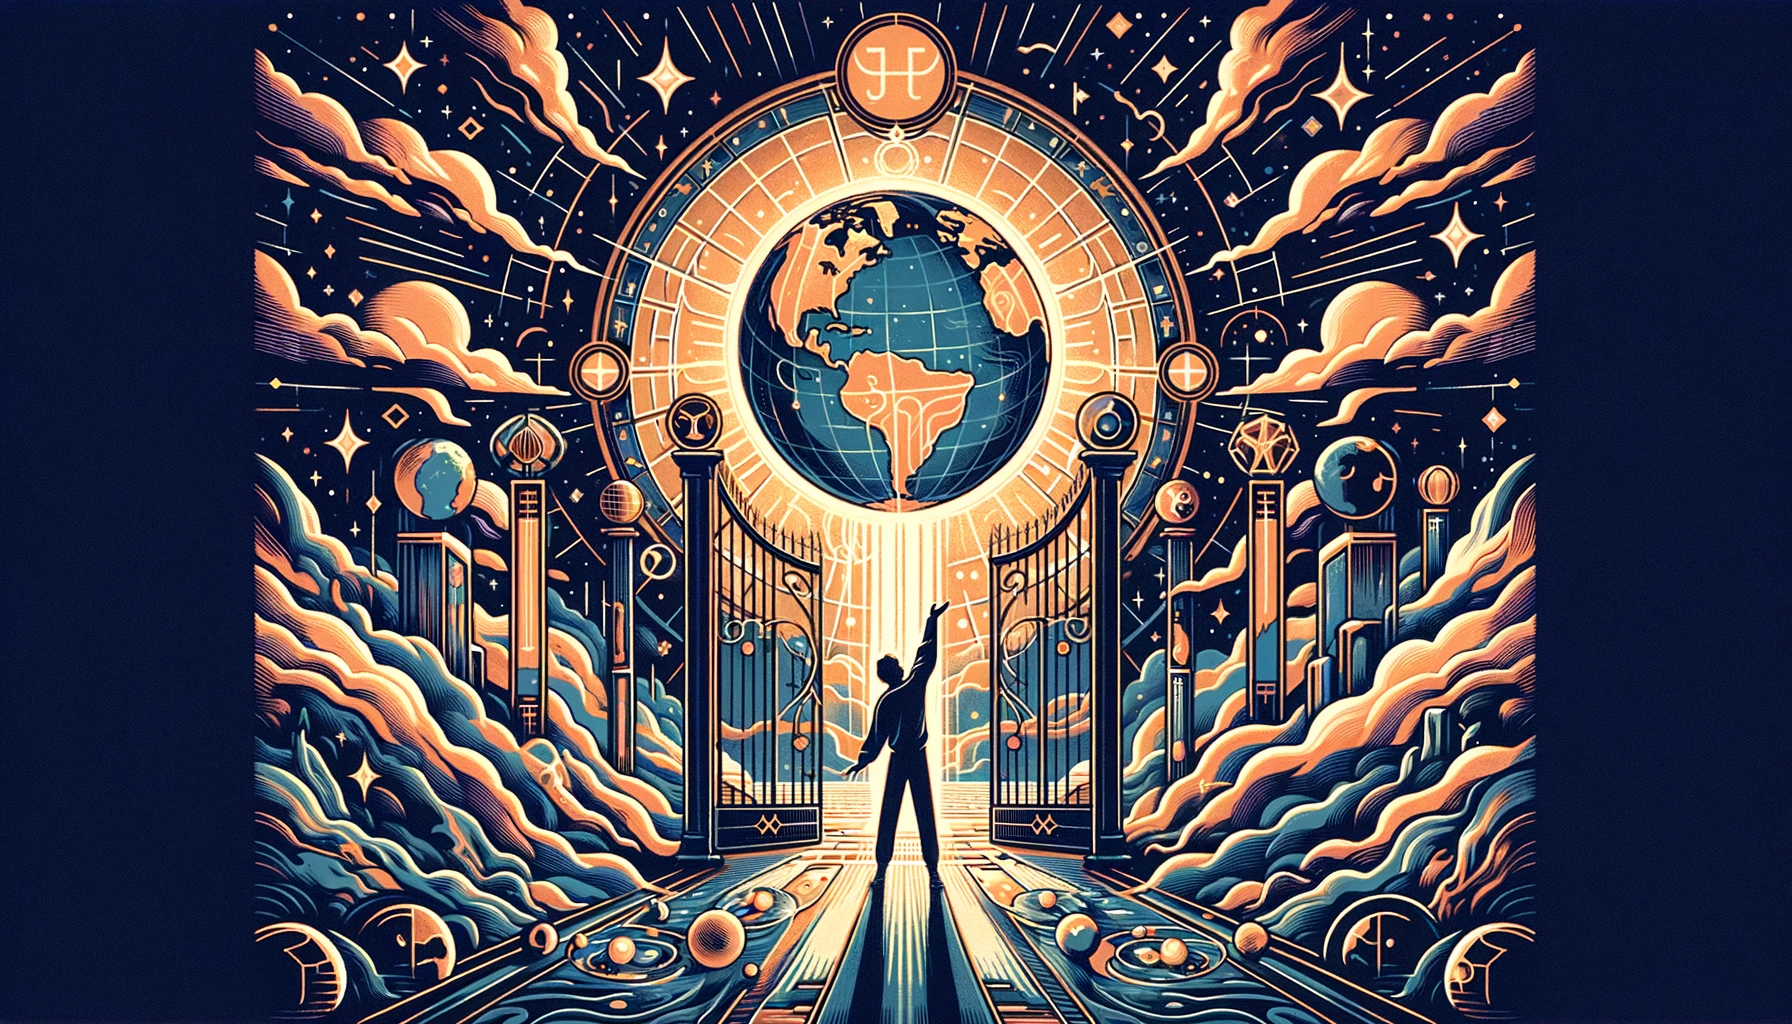 "Illustration symbolizing the desire for completion, fulfillment, and unity with 'The World' Tarot card. Depicts imagery suggesting aspirations for global understanding and personal achievement, evoking a sense of longing and harmony with life's interconnectedness."